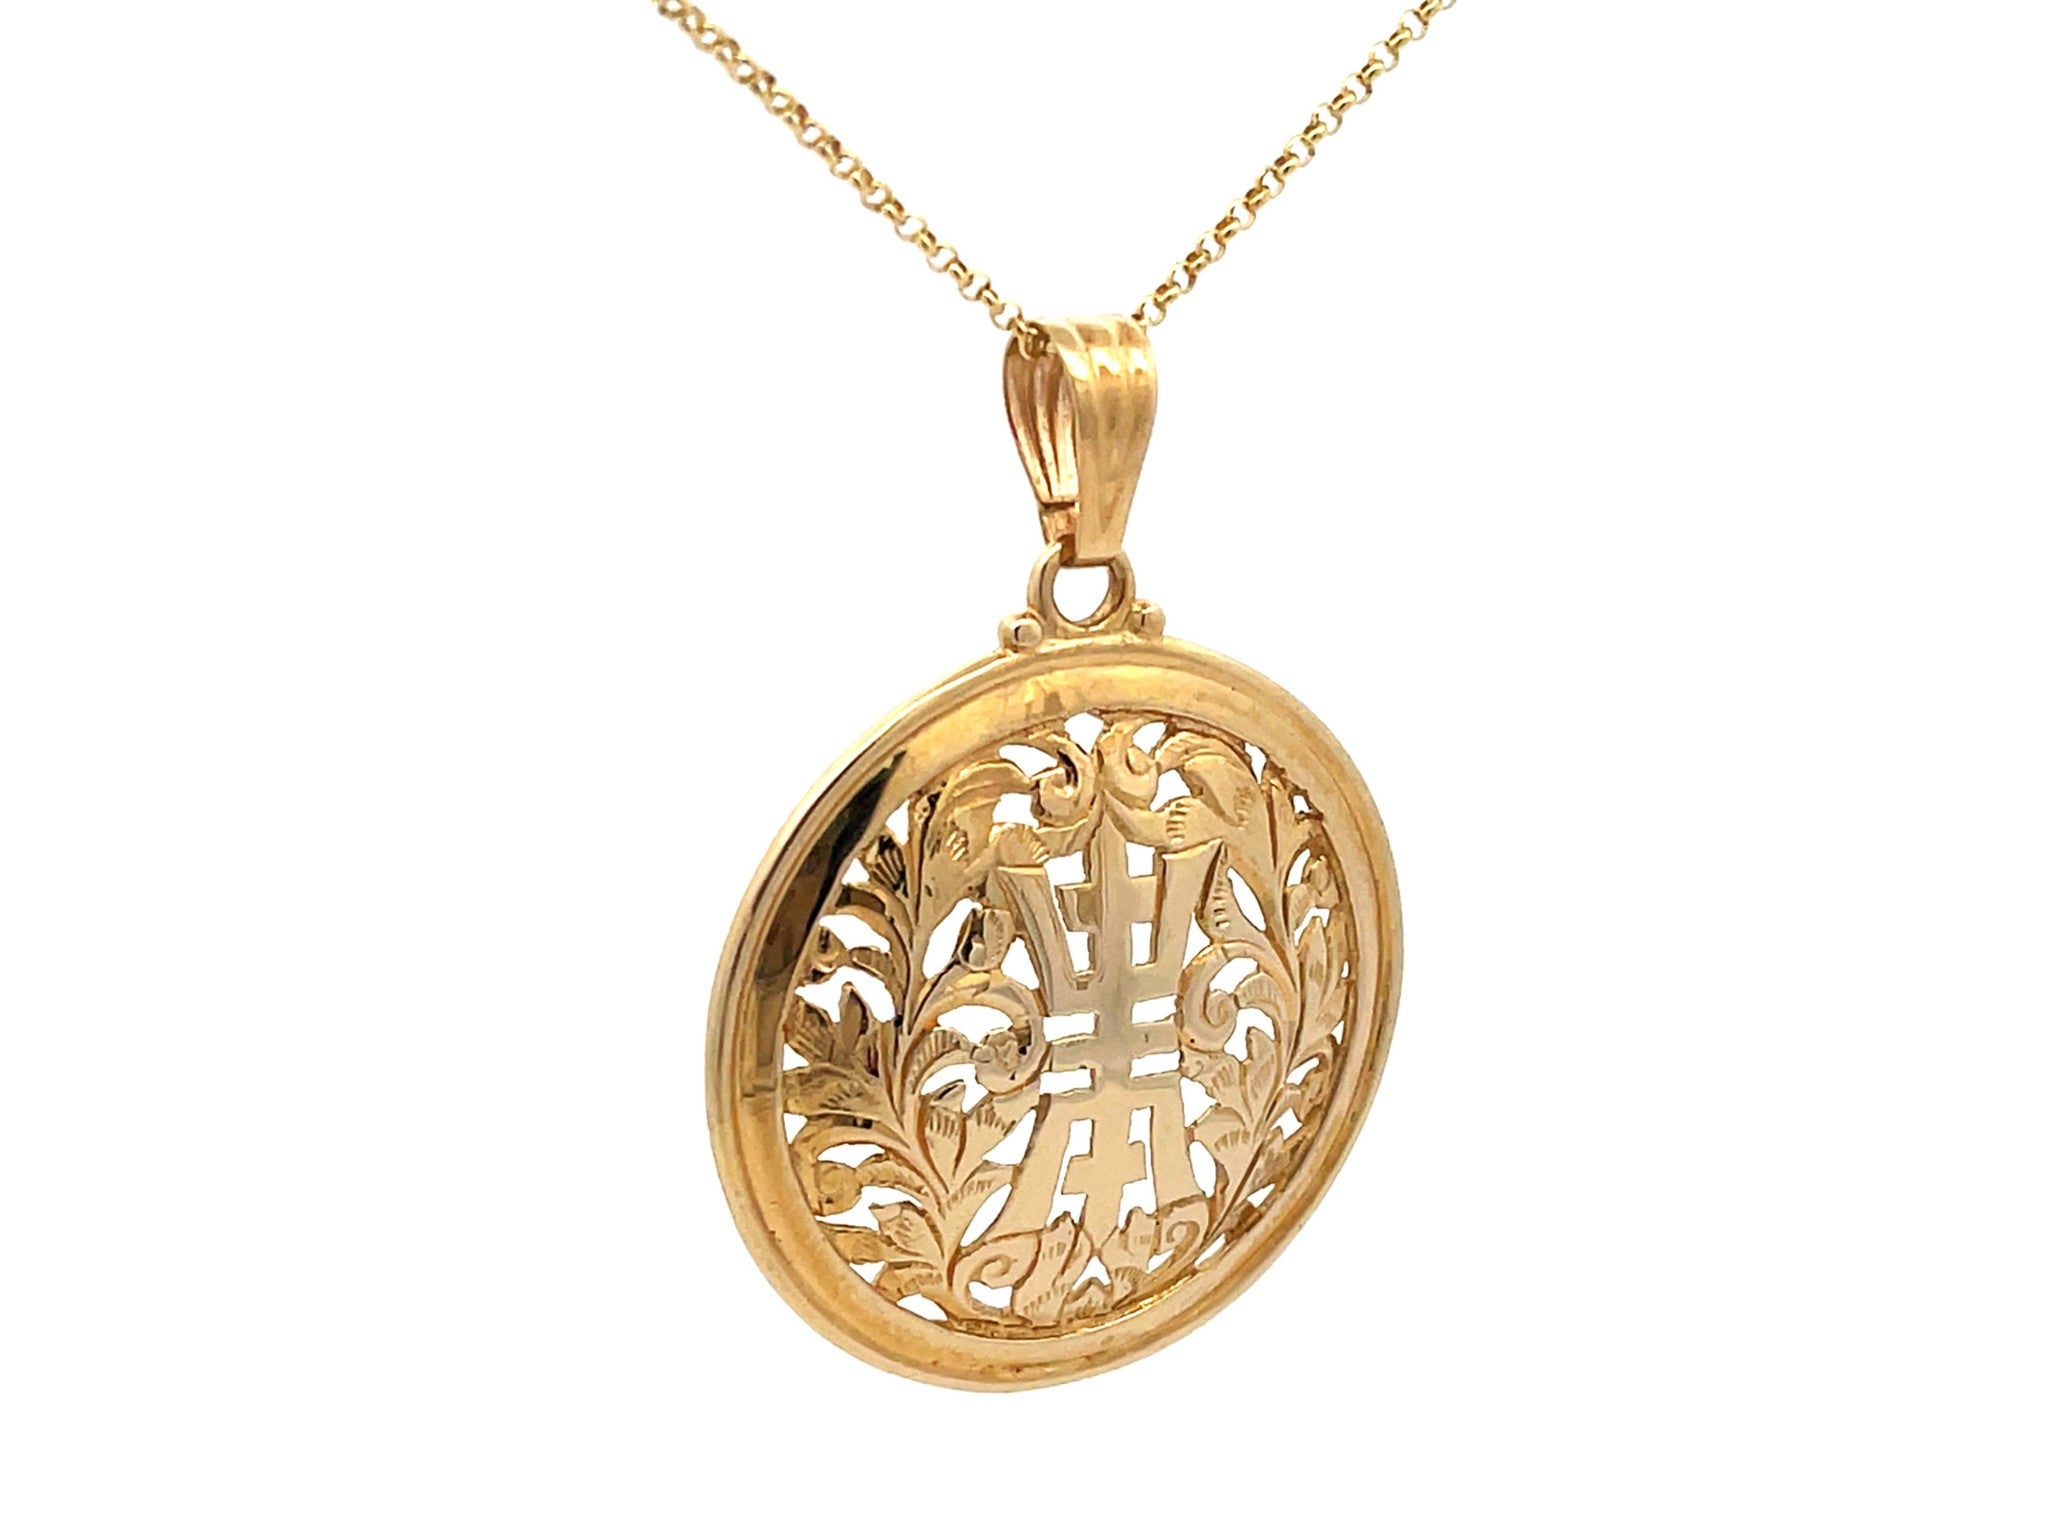 Mings Hawaii Long Life Round Pendant in 14k Yellow Gold with Chain